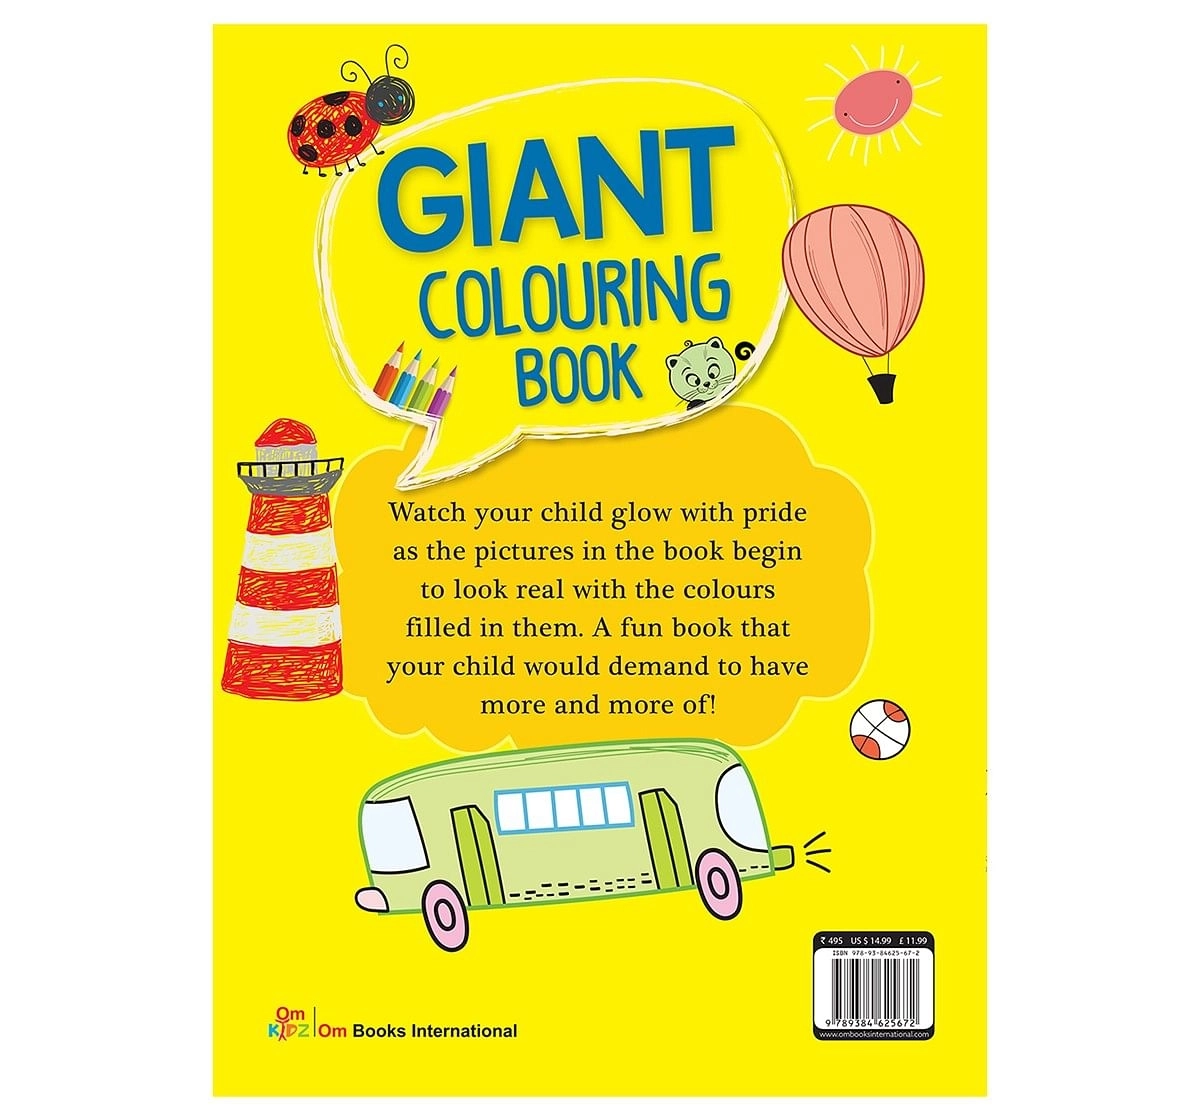 Colouring Book : Giant Colouring Book For Kids, 368 Pages Book By Om Books Editorial Team, Paperback